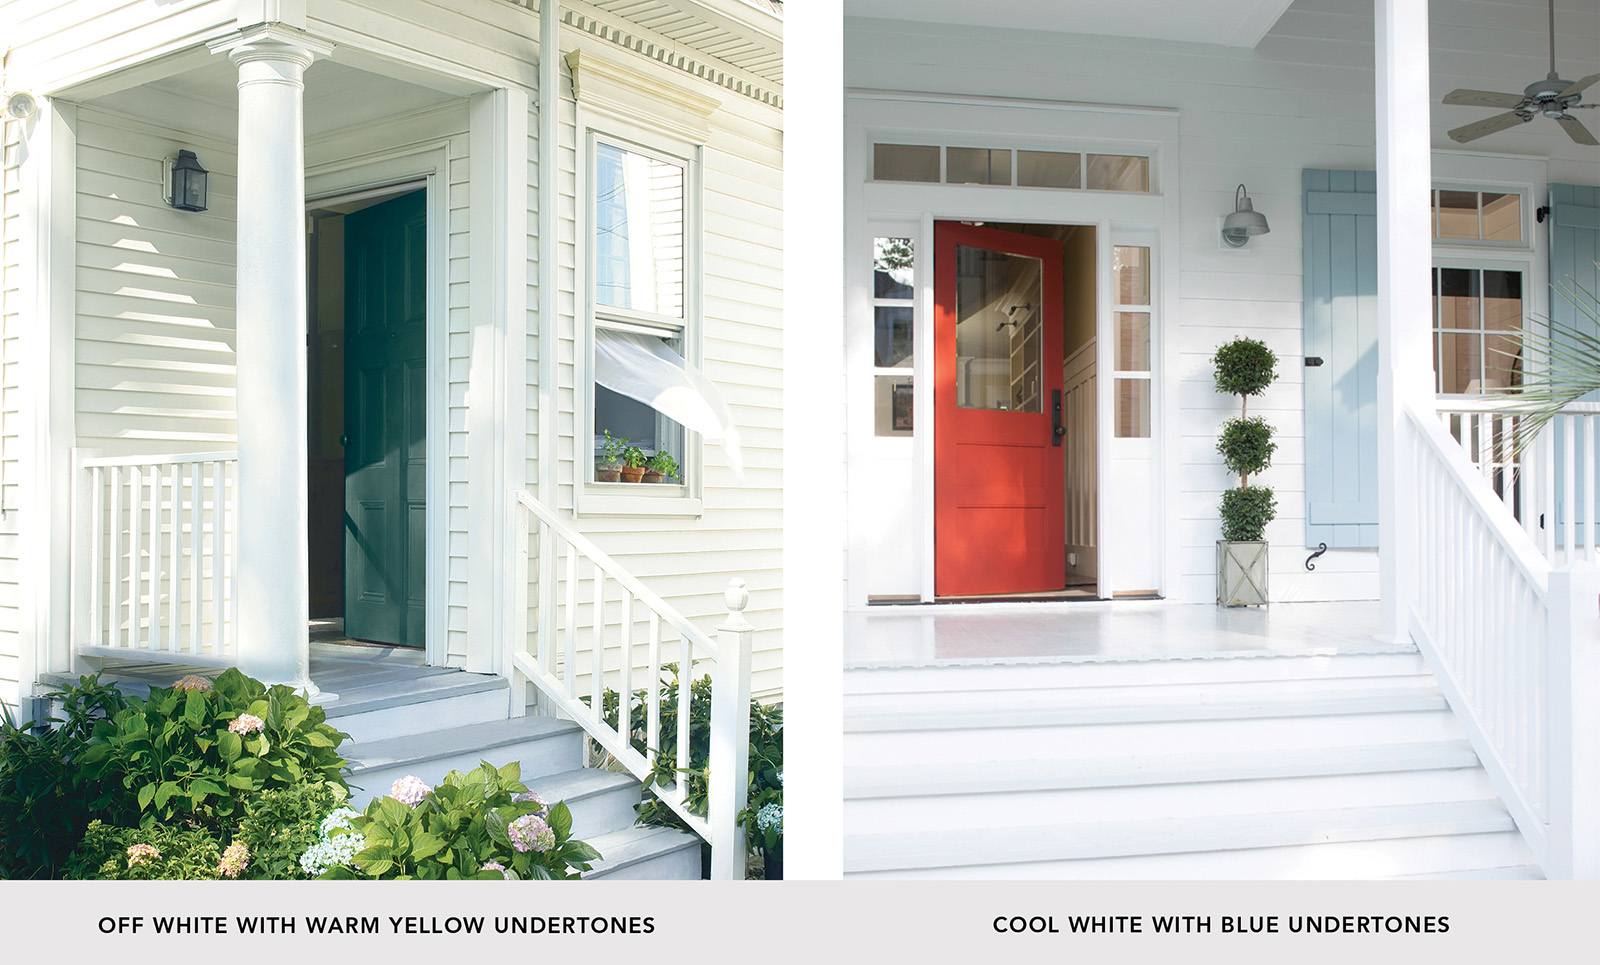 Comparison of home exterior with warm white paint vs. cool white paint 